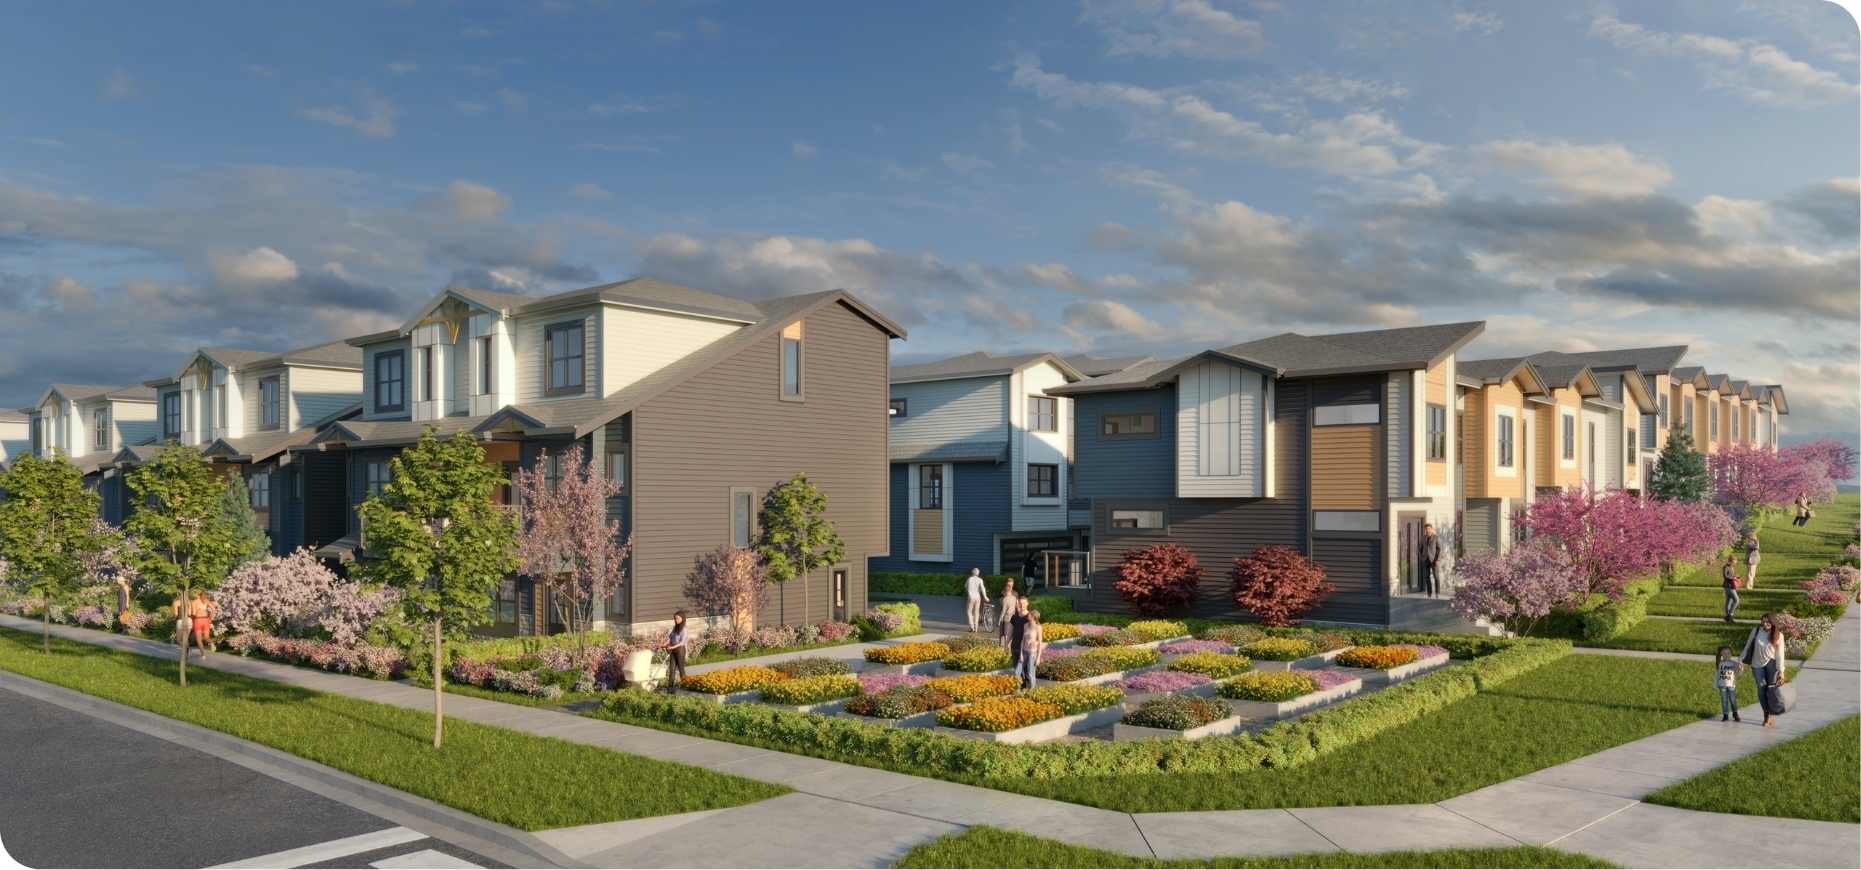 Elwynn Green Surrey - A residential community of 173 three-bedroom Surrey townhomes and duplexes.